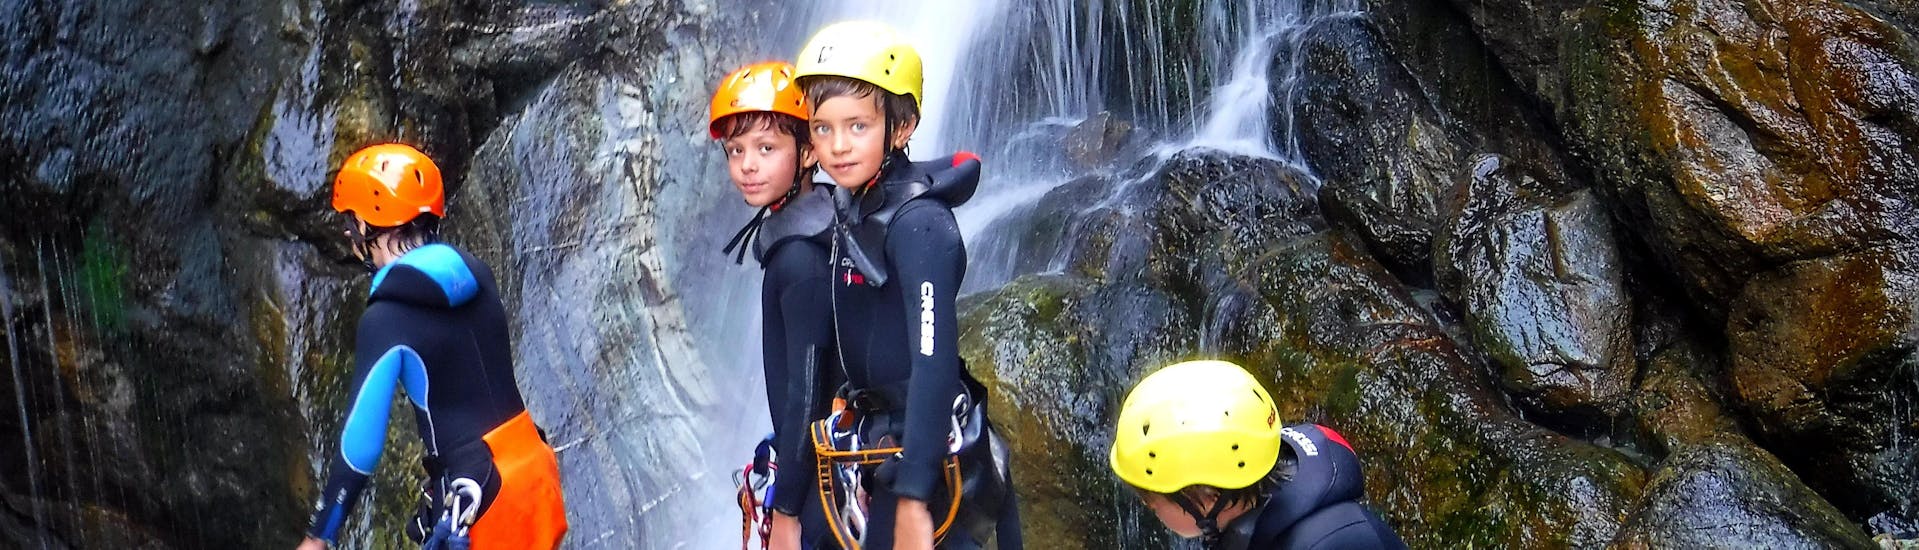 Una famiglia si gode il Canyoning nel Chalamy per Famiglie con Canyoning Valle D'Aosta